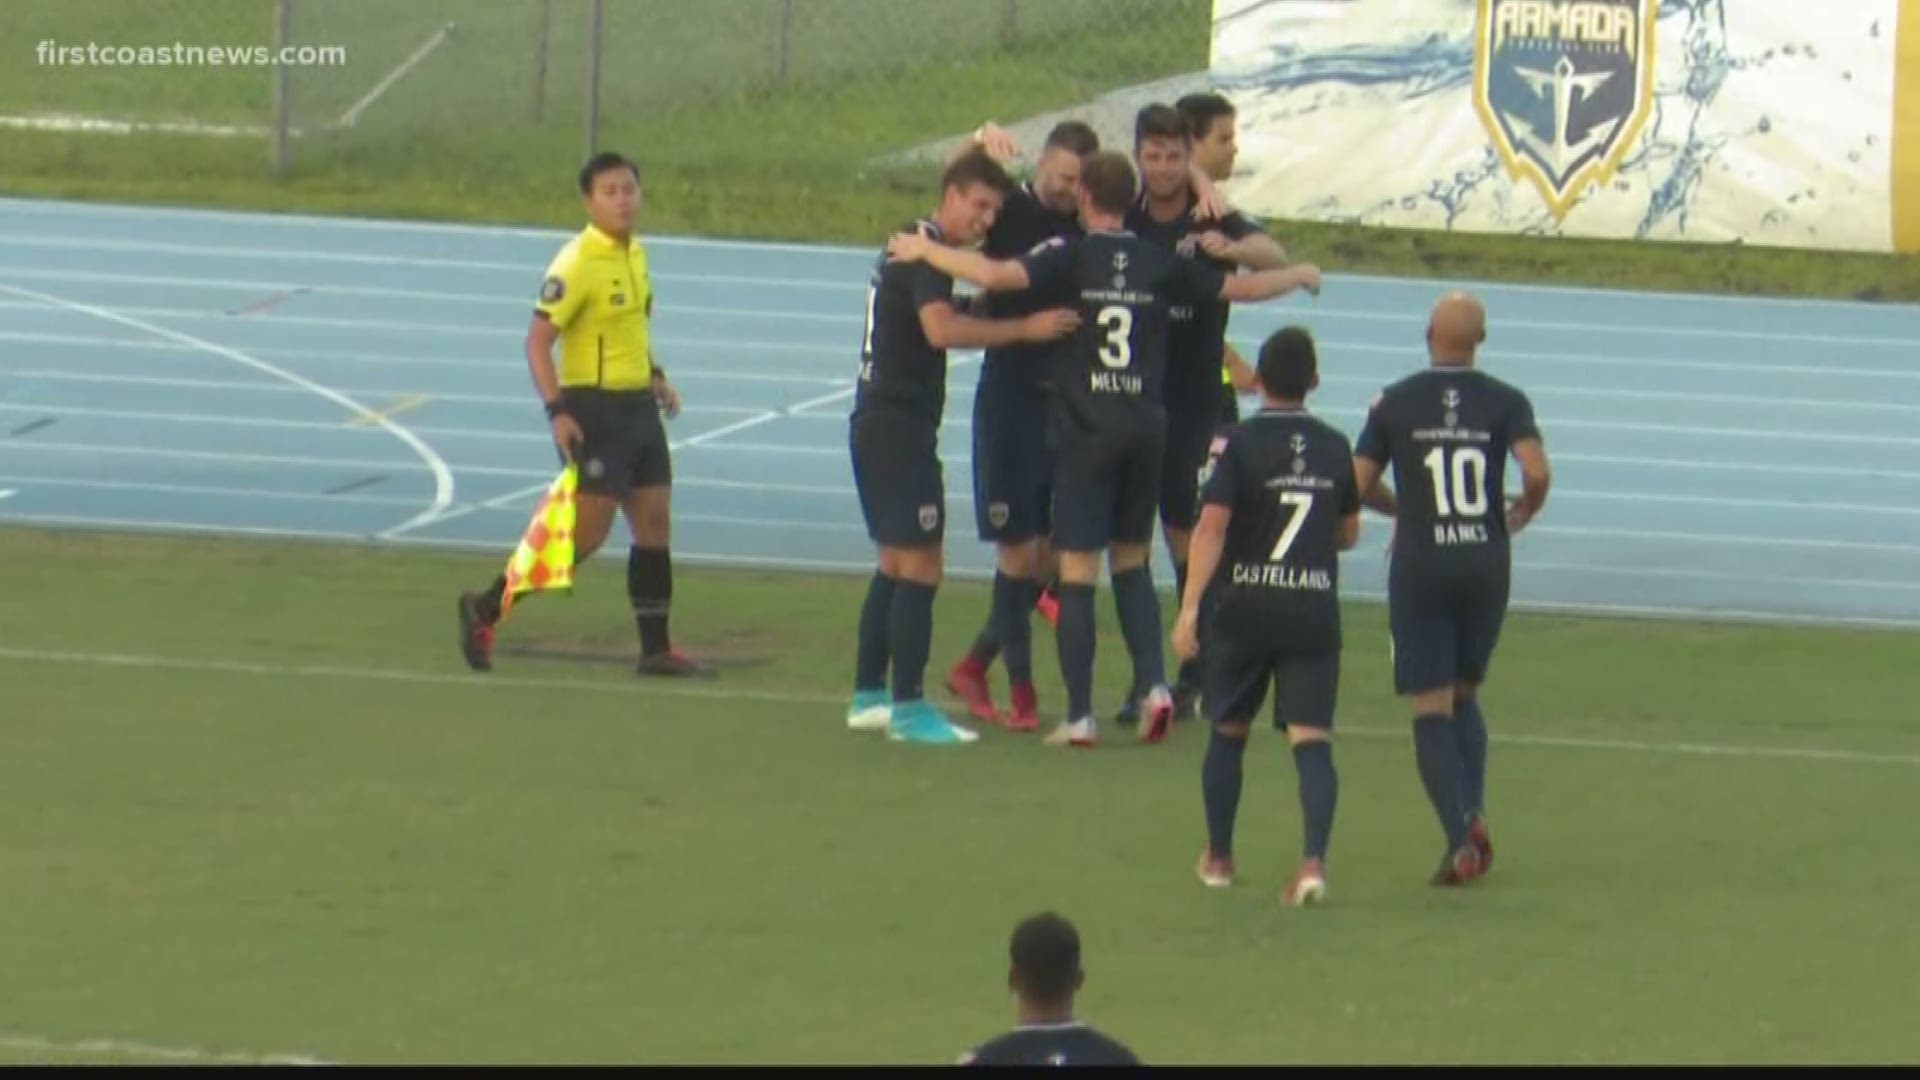 The Jacksonville Armada Football Club defeated Miami United Football Club 4-1 at Hodges Stadium in Jacksonville in their debut playoff match.